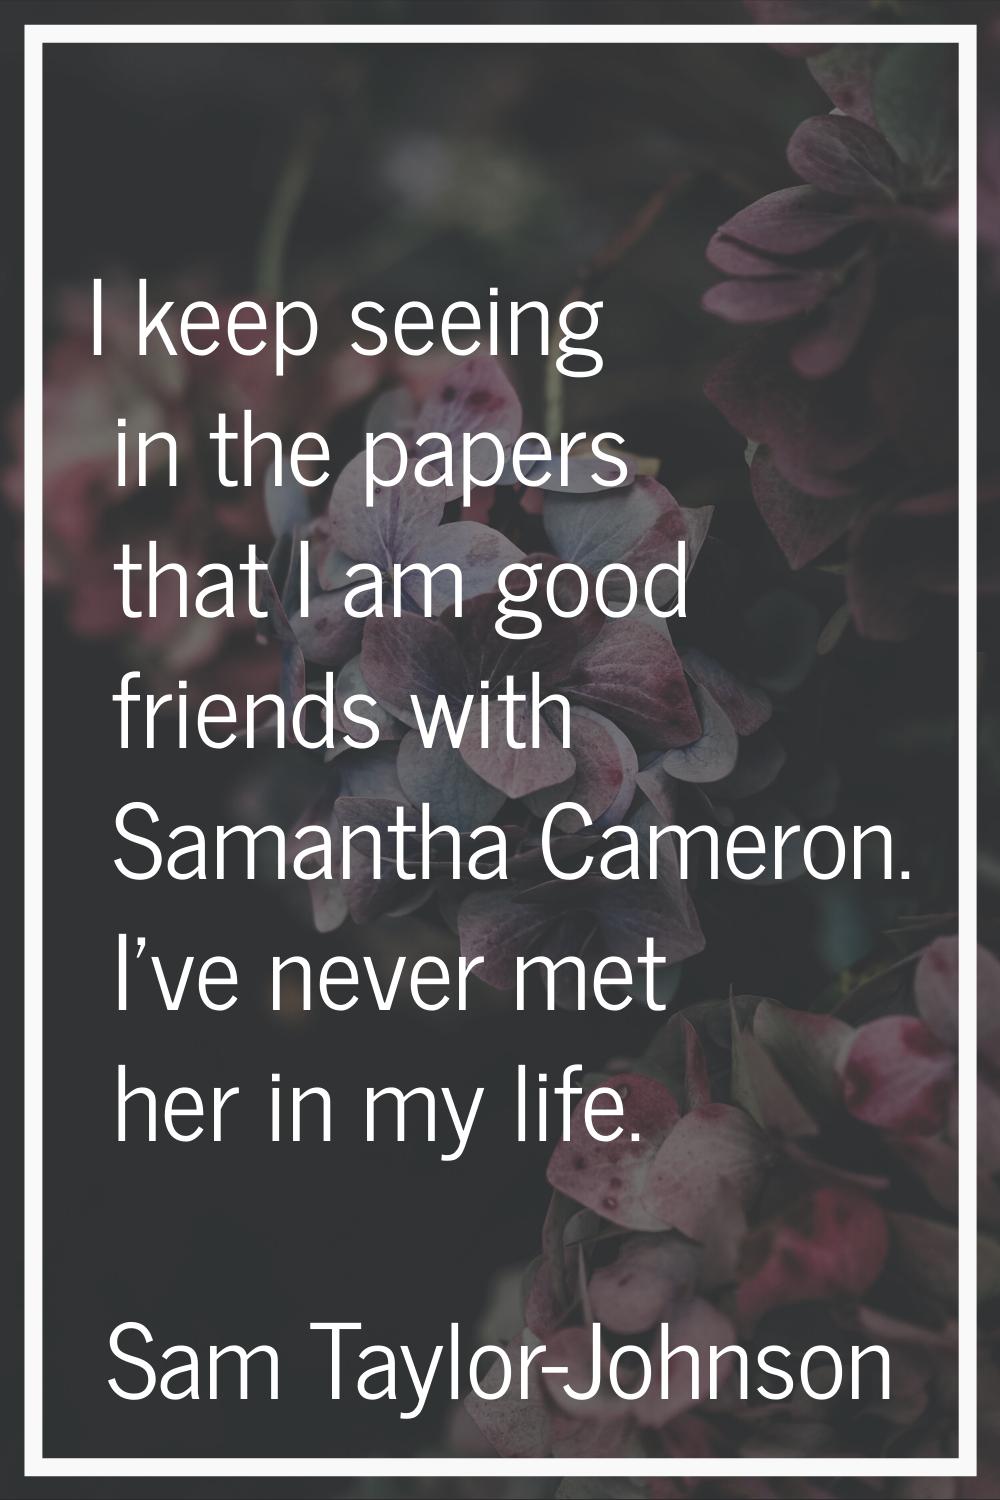 I keep seeing in the papers that I am good friends with Samantha Cameron. I've never met her in my 